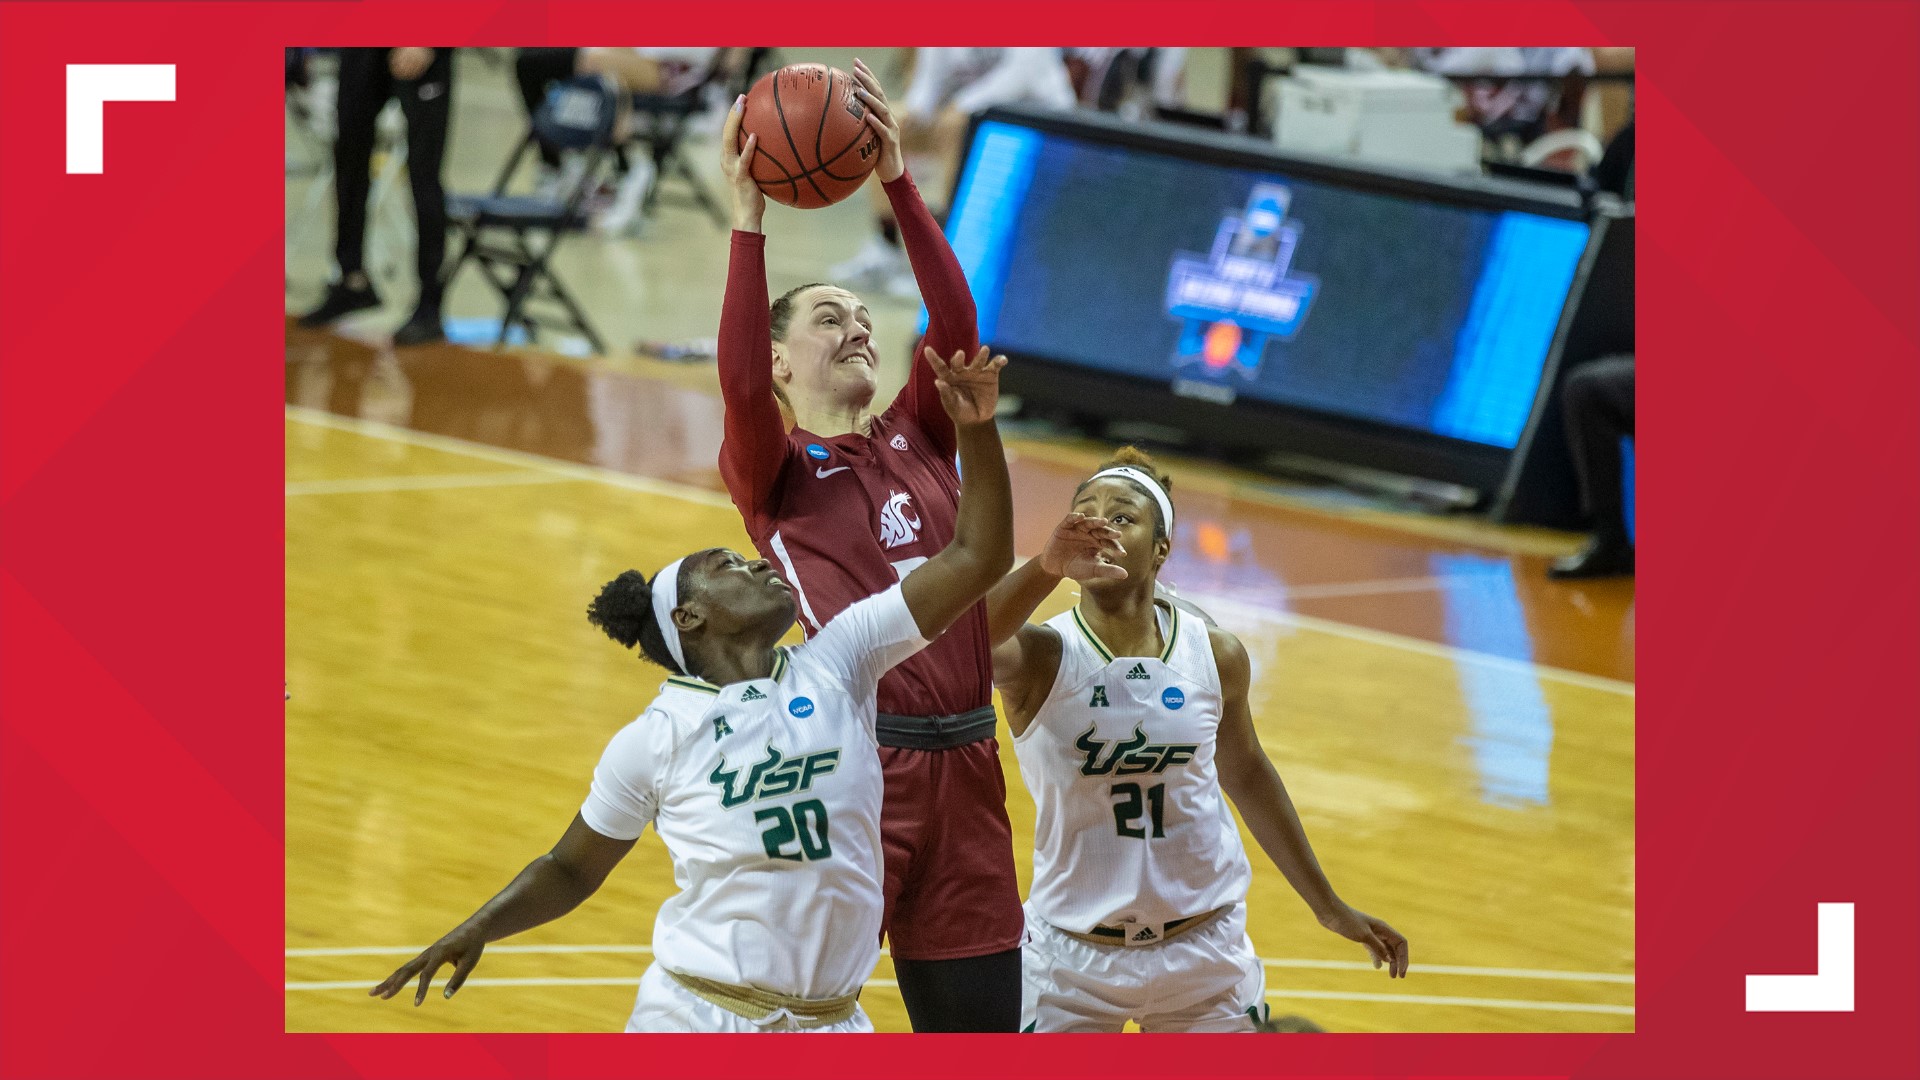 The ninth-seeded Cougars made the tournament for the second time in program history but couldn't make it past eighth-seeded South Florida in the first round.